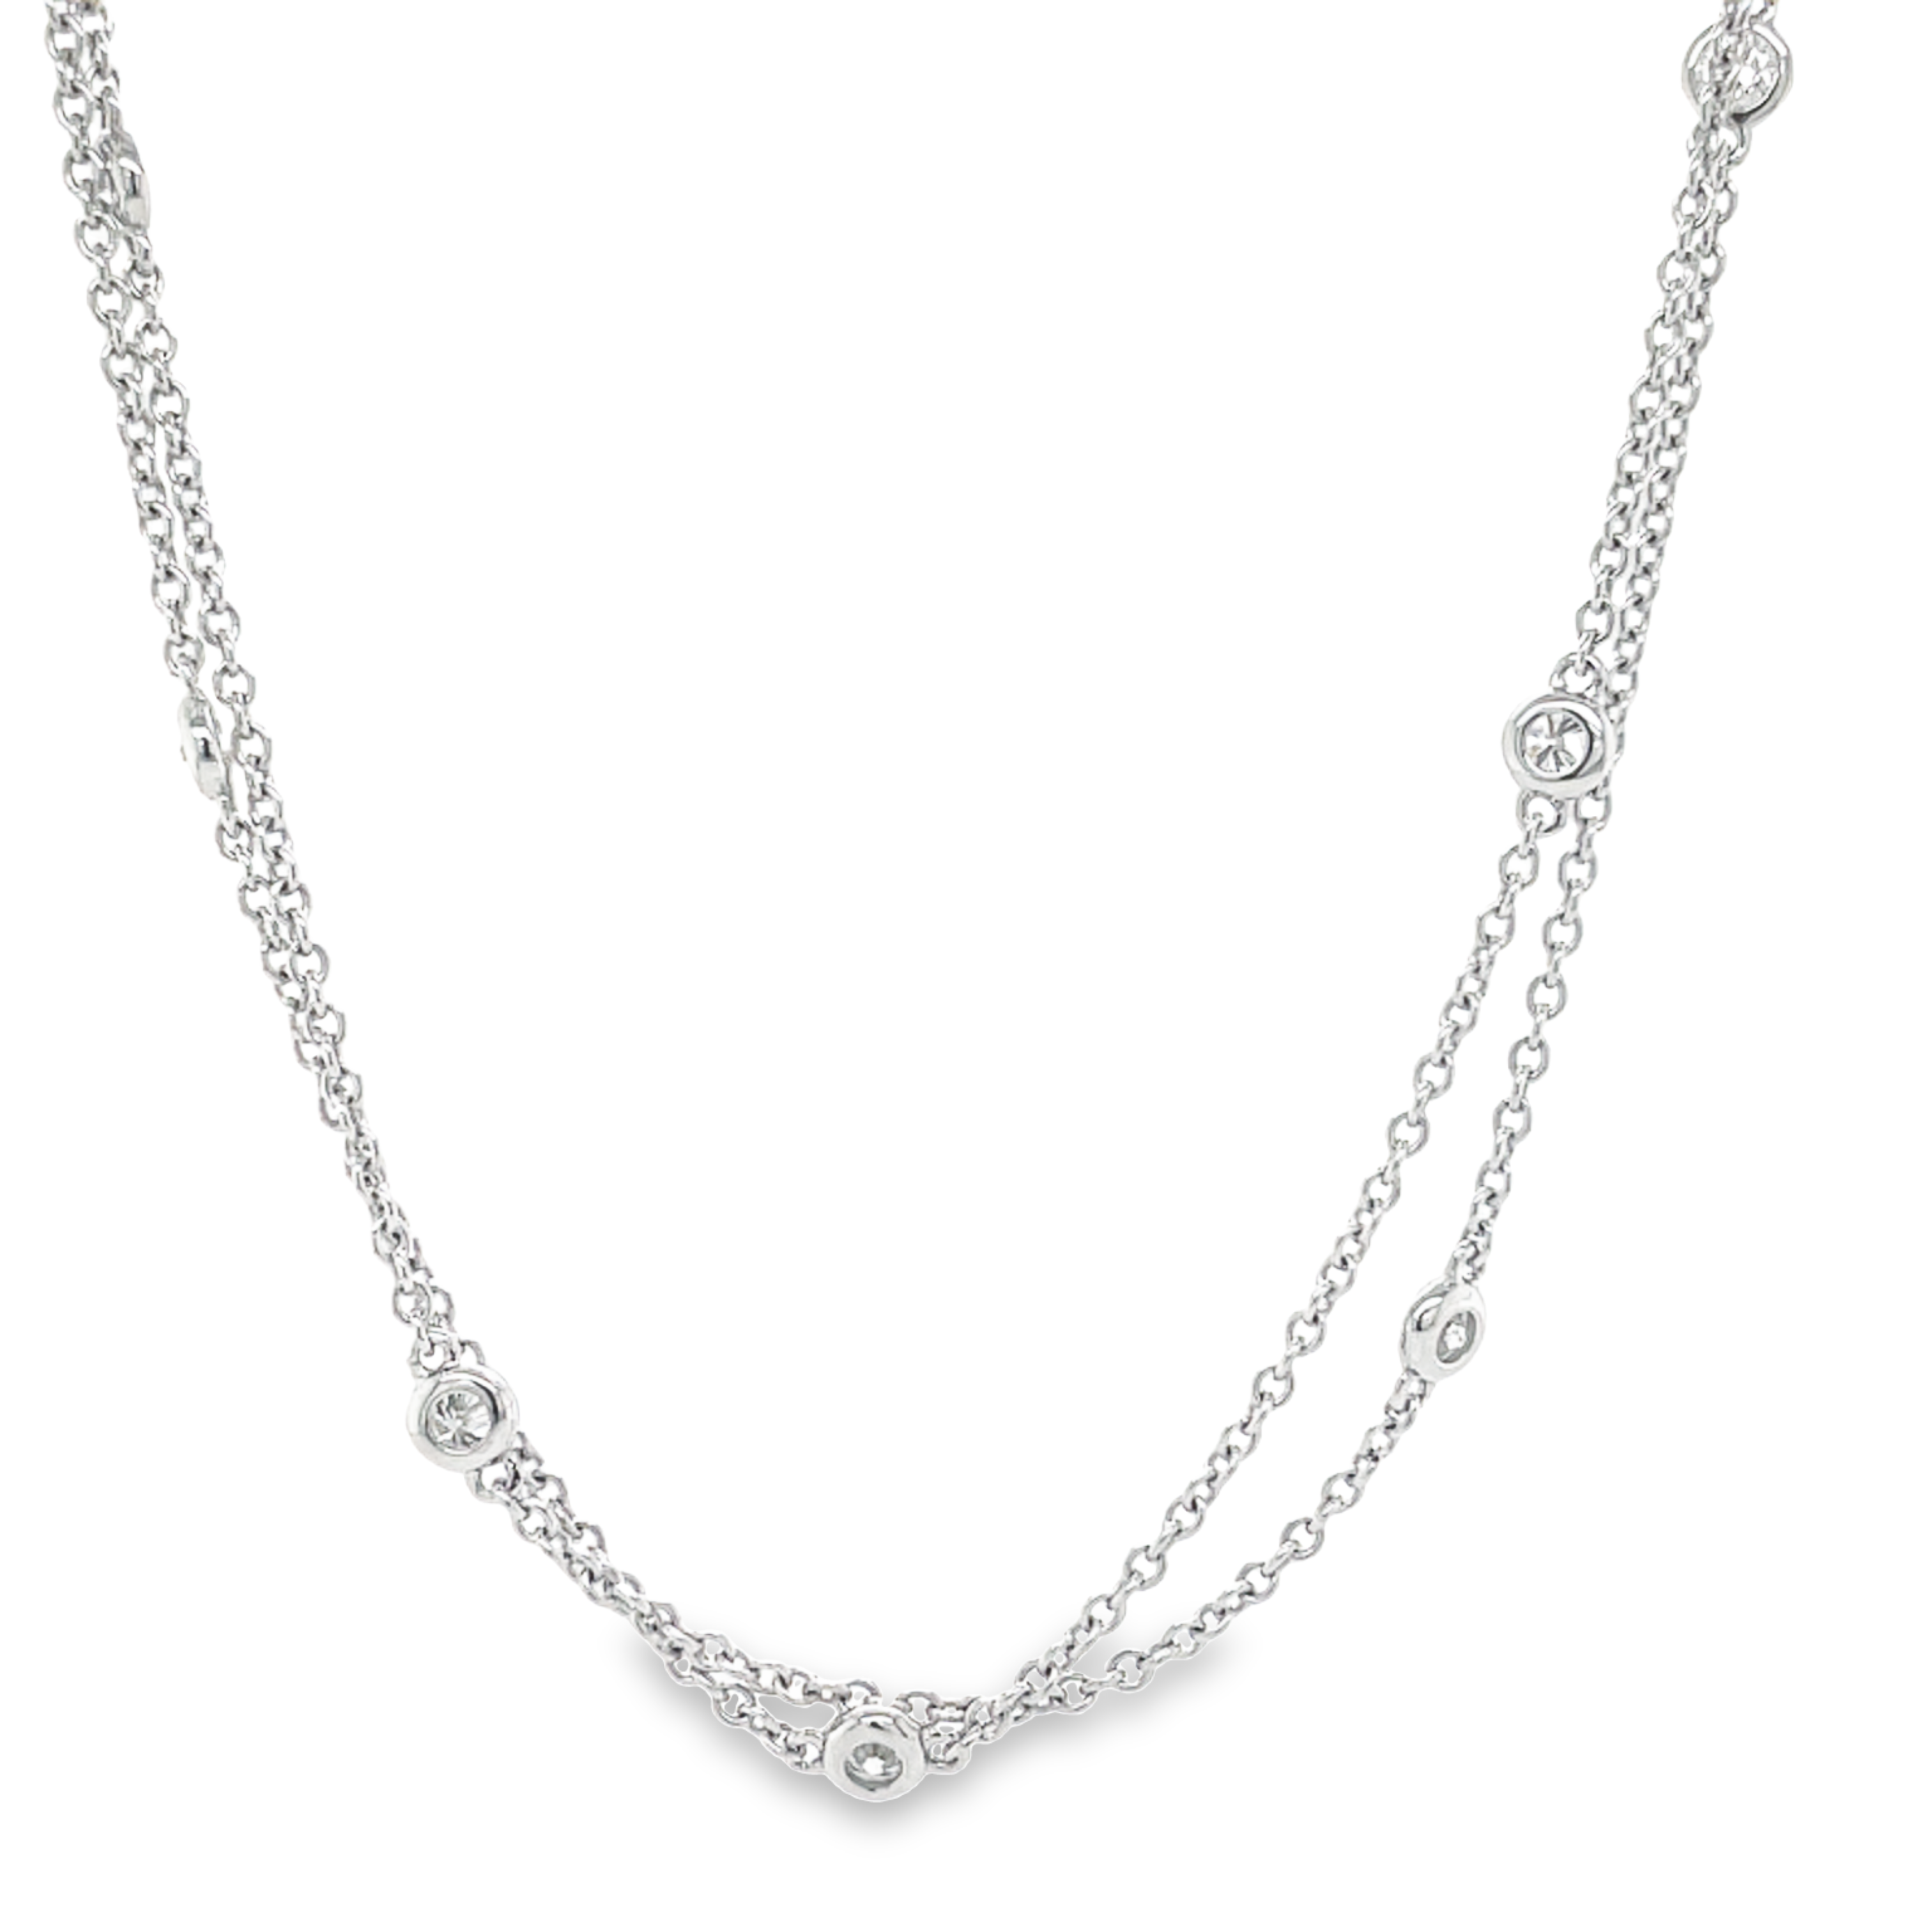 This beautiful 1.68 cts Diamonds By the Yard Double Chain Necklace features double charming diamond by the yard and 17 round diamonds for a total of 1.68 cts. The length is 19", perfect for a dressy or casual look. Quality craftsmanship ensures timeless elegance with every wear.